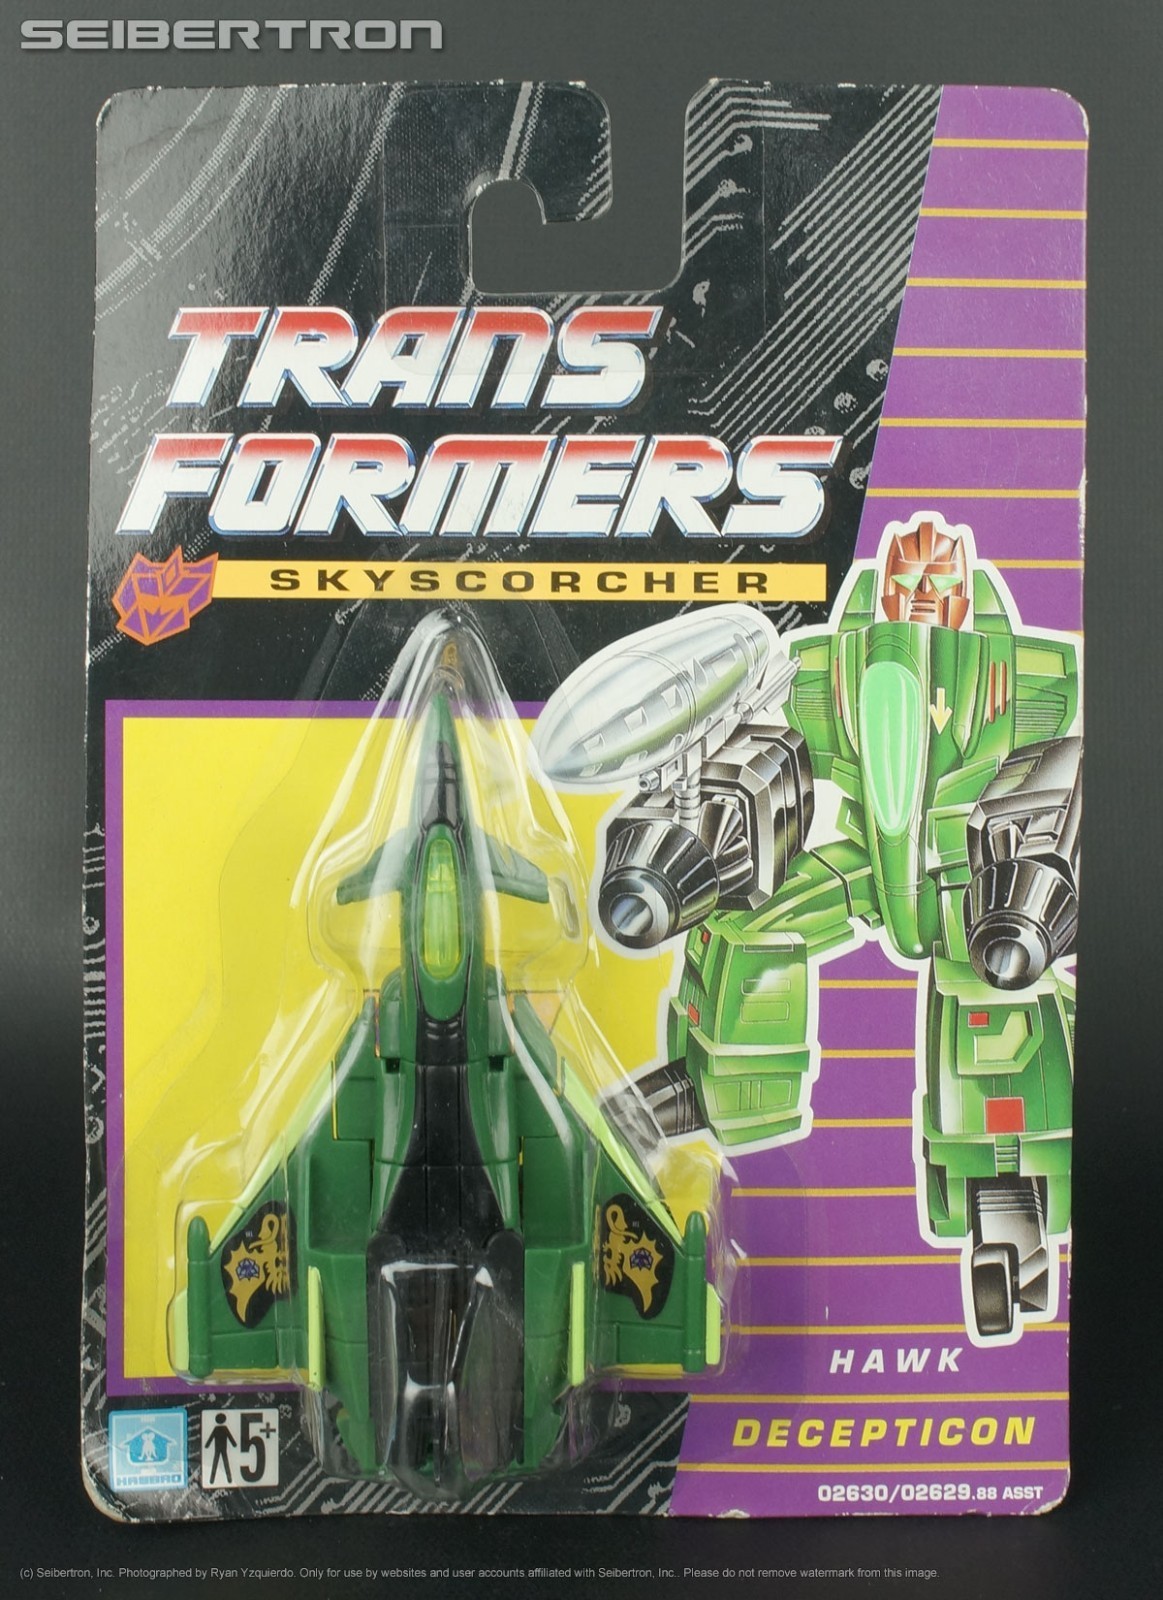 Over 370+ eBay Auctions from Seibertron: European TFs, Bruticus, Double Punch, MOTU, TMNT and more!